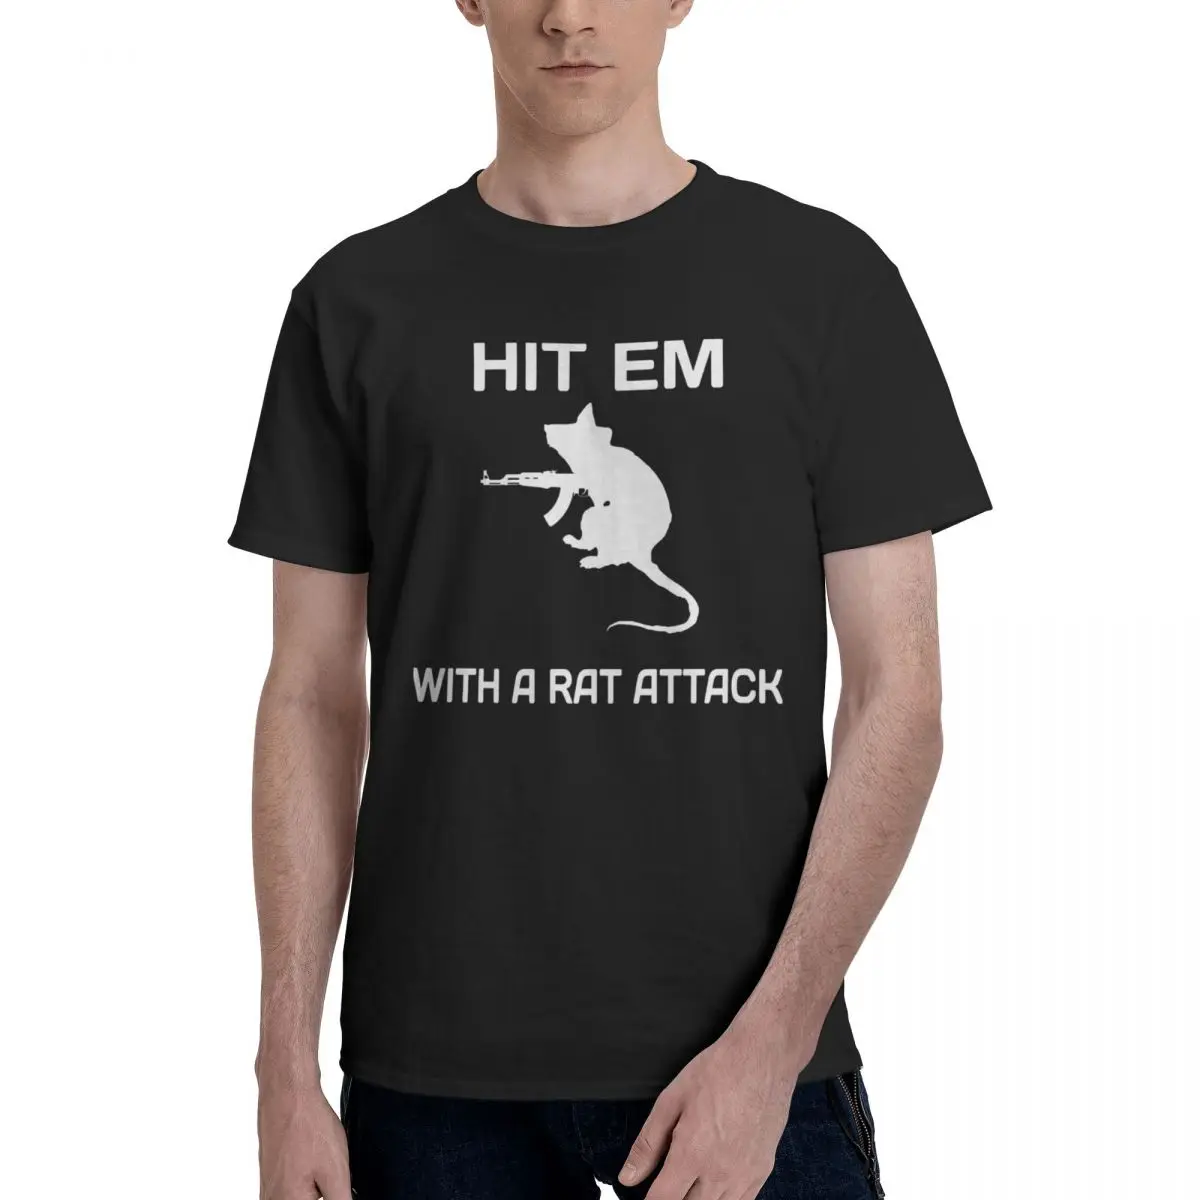 

Escape from Tarkov FPS RPG MMO Game 100% Cotton TShirts HIT EM WITH A RAT ATTACK Print Men's T Shirt Funny Clothing 6XL